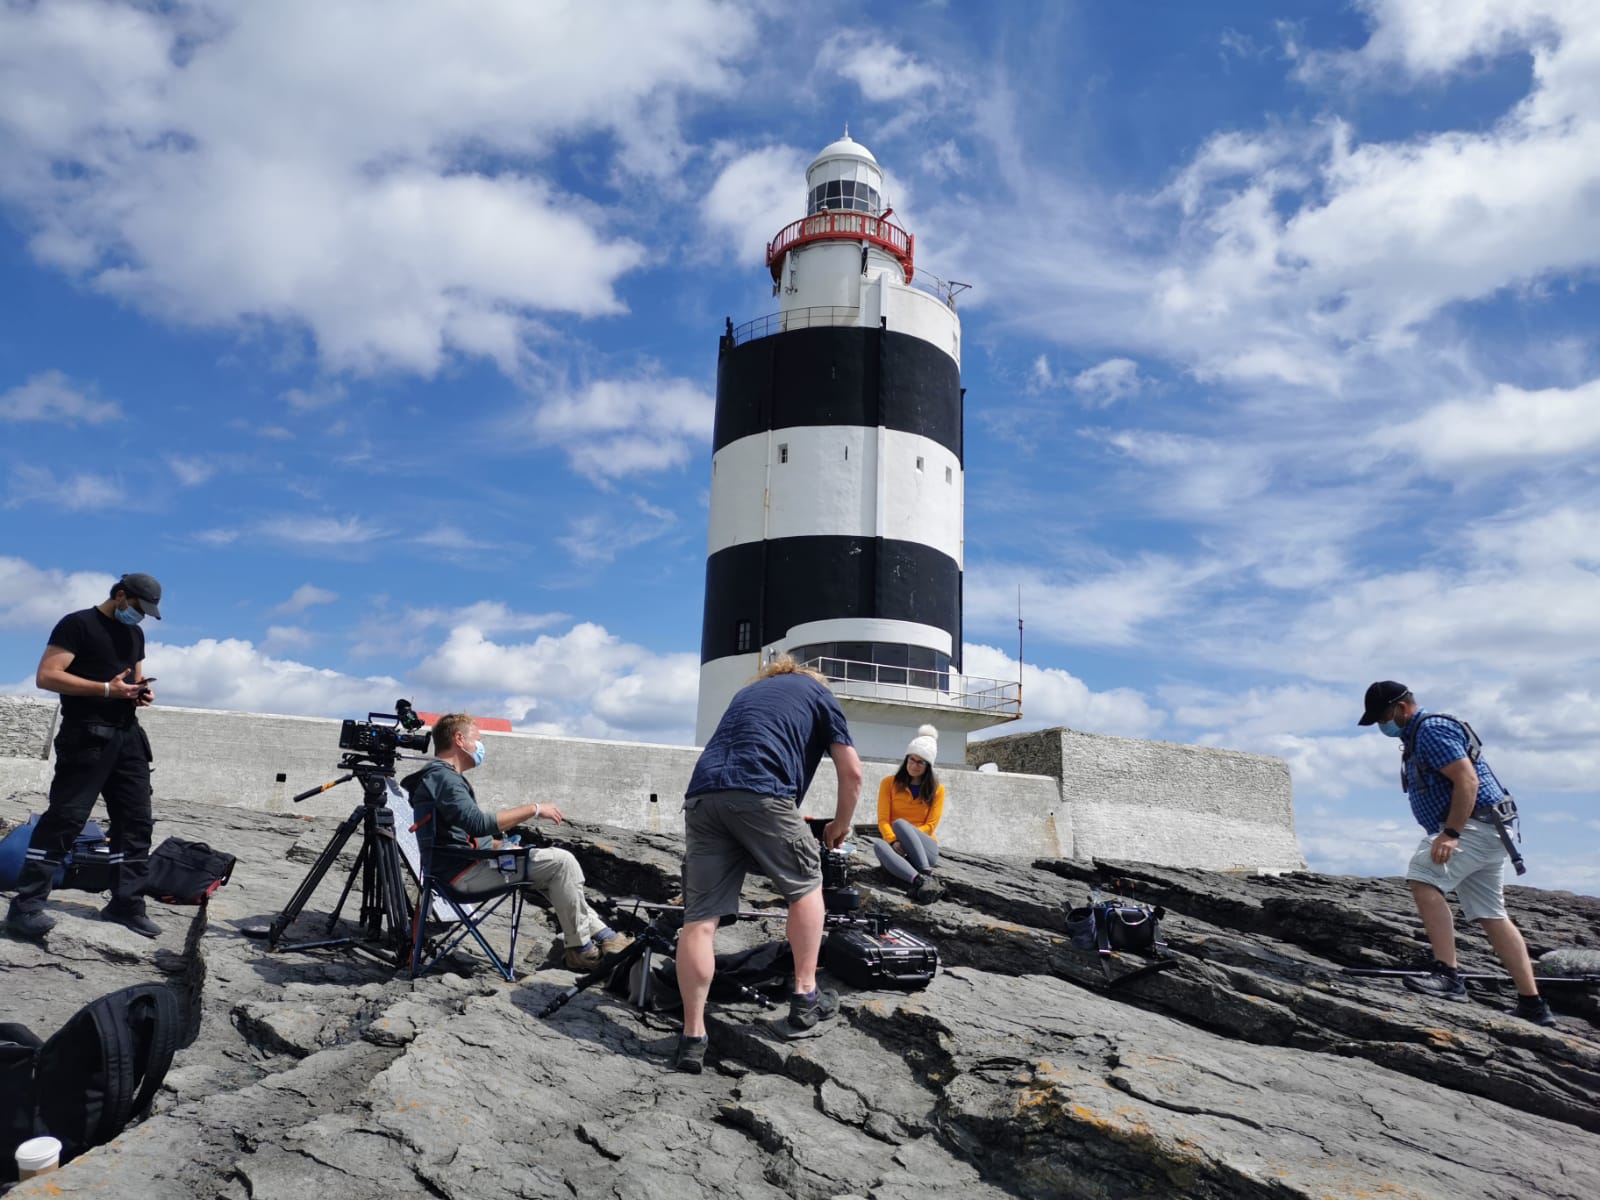 Cameras roll on “The Island – 1.8 Billion Years in the Making” with Liz Bonnin